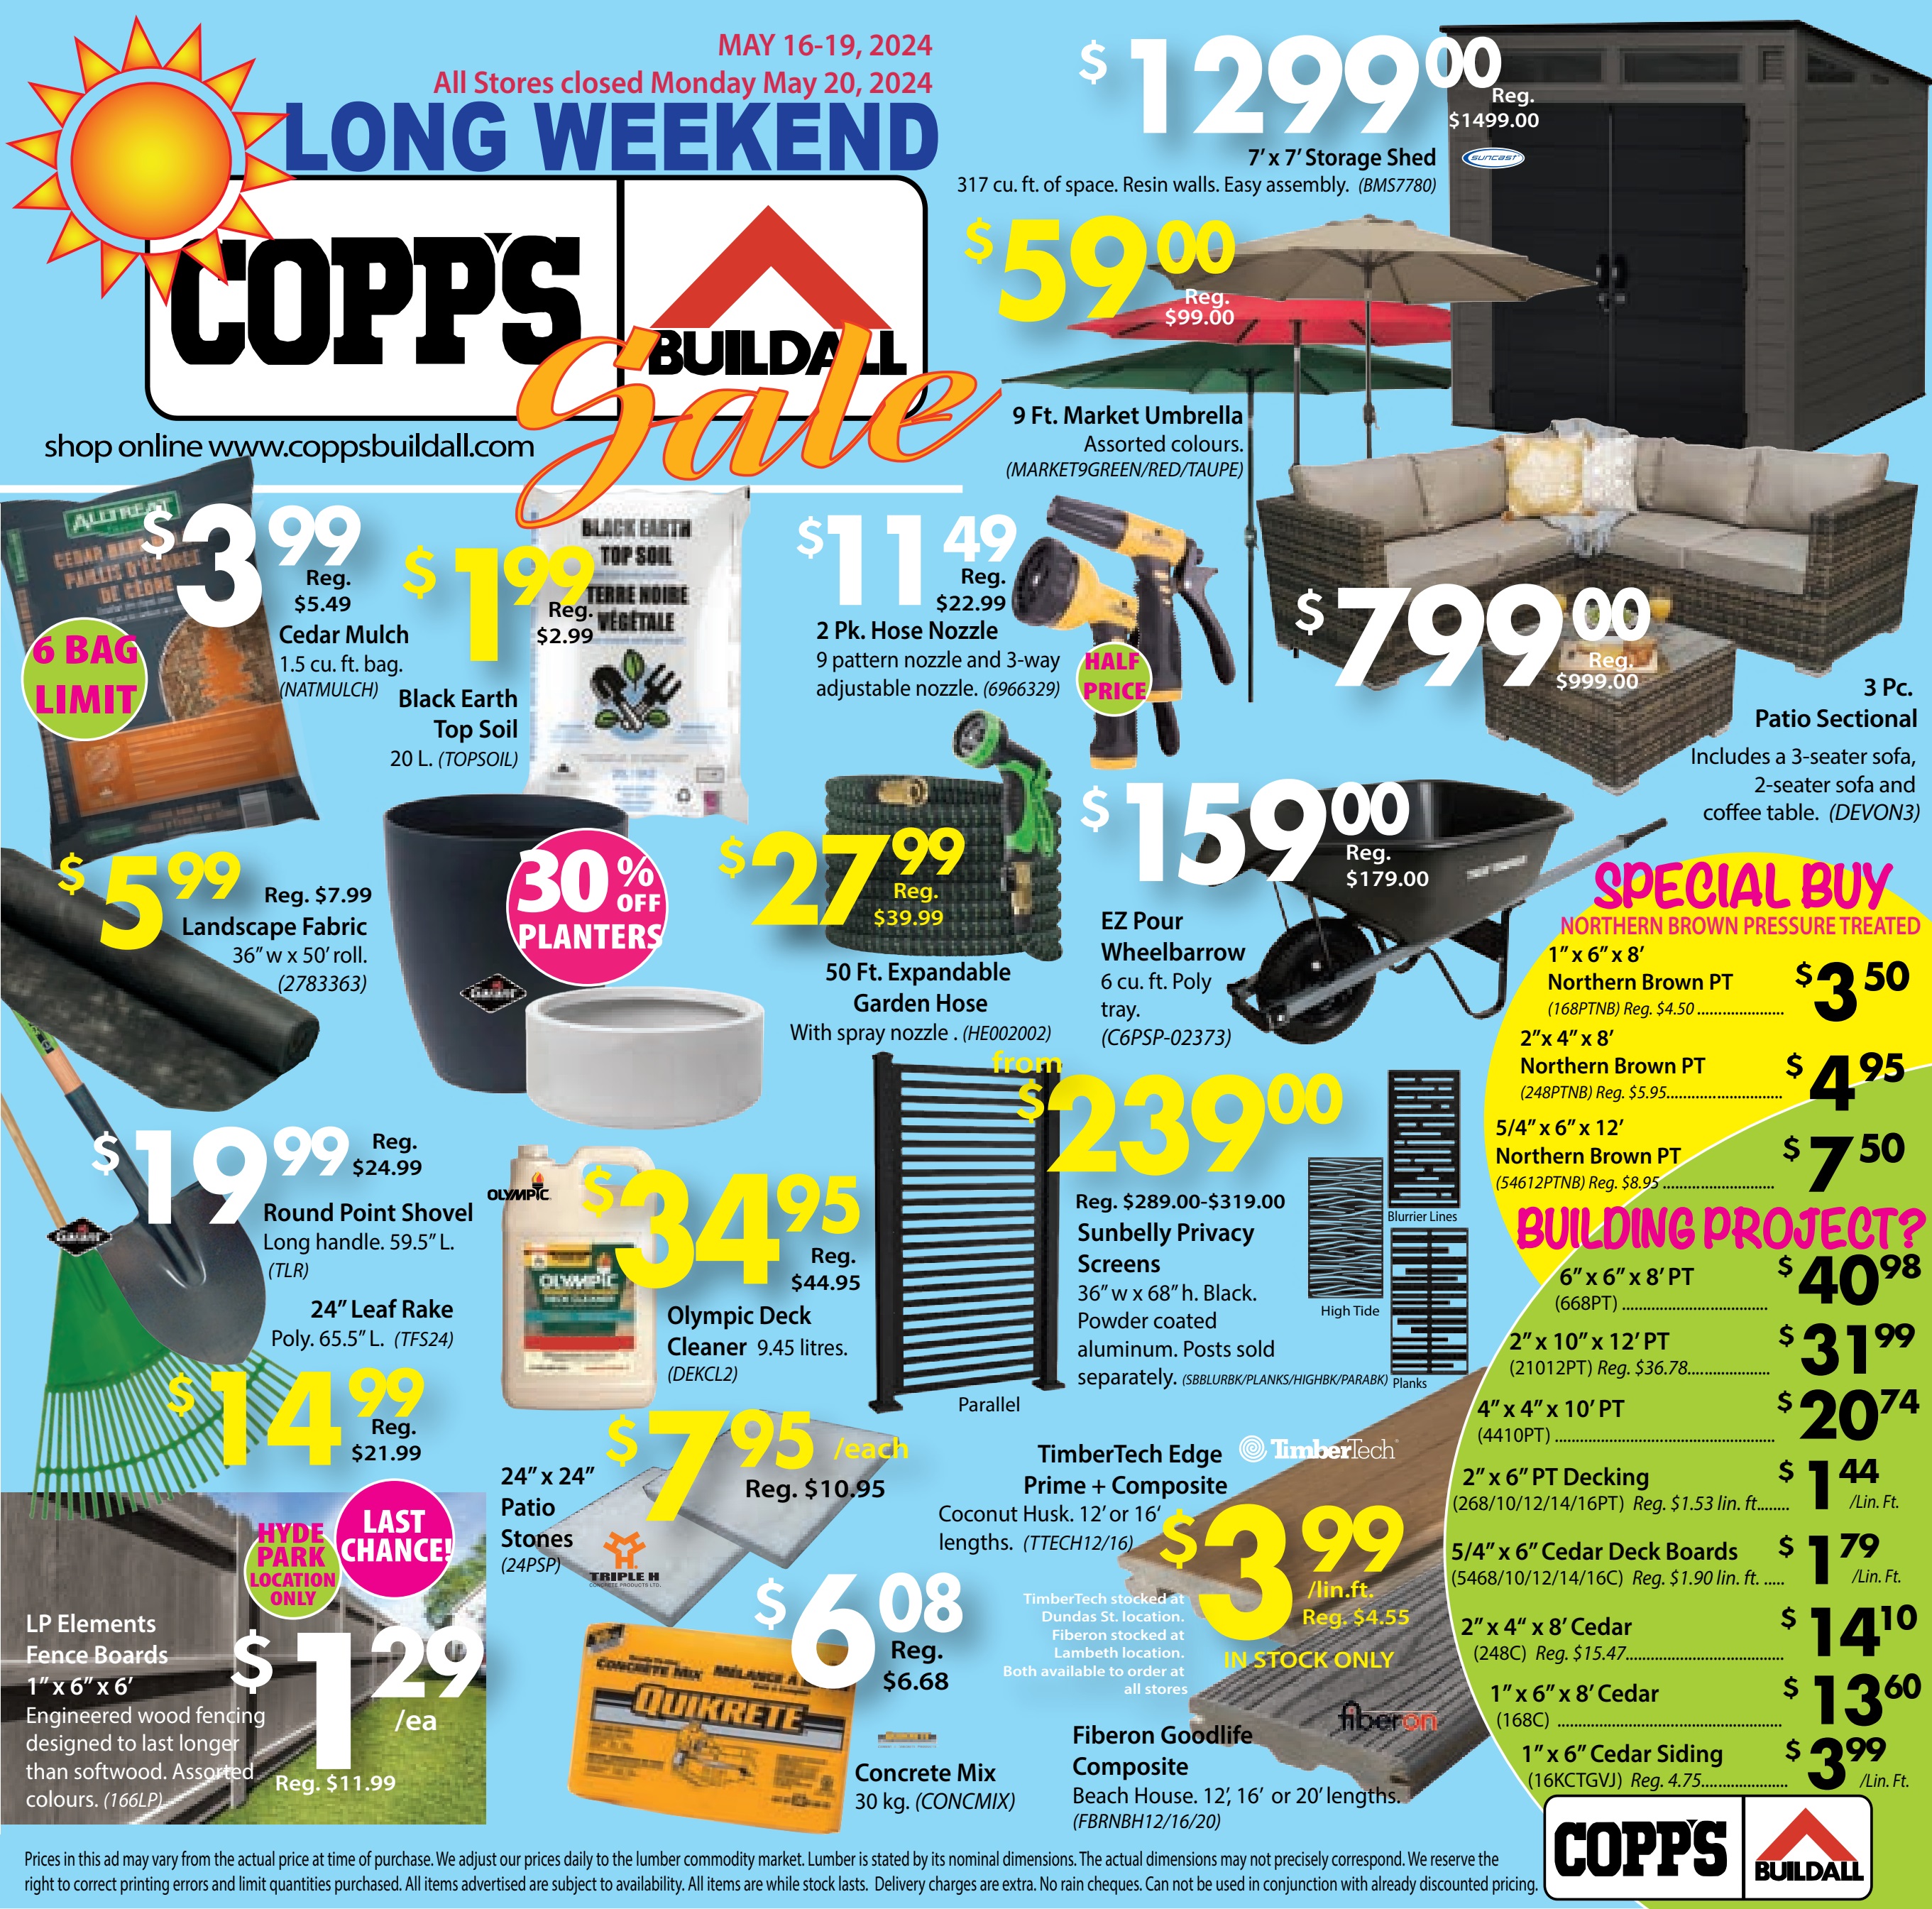 Copp's Buildall - Weekly Flyer Specials